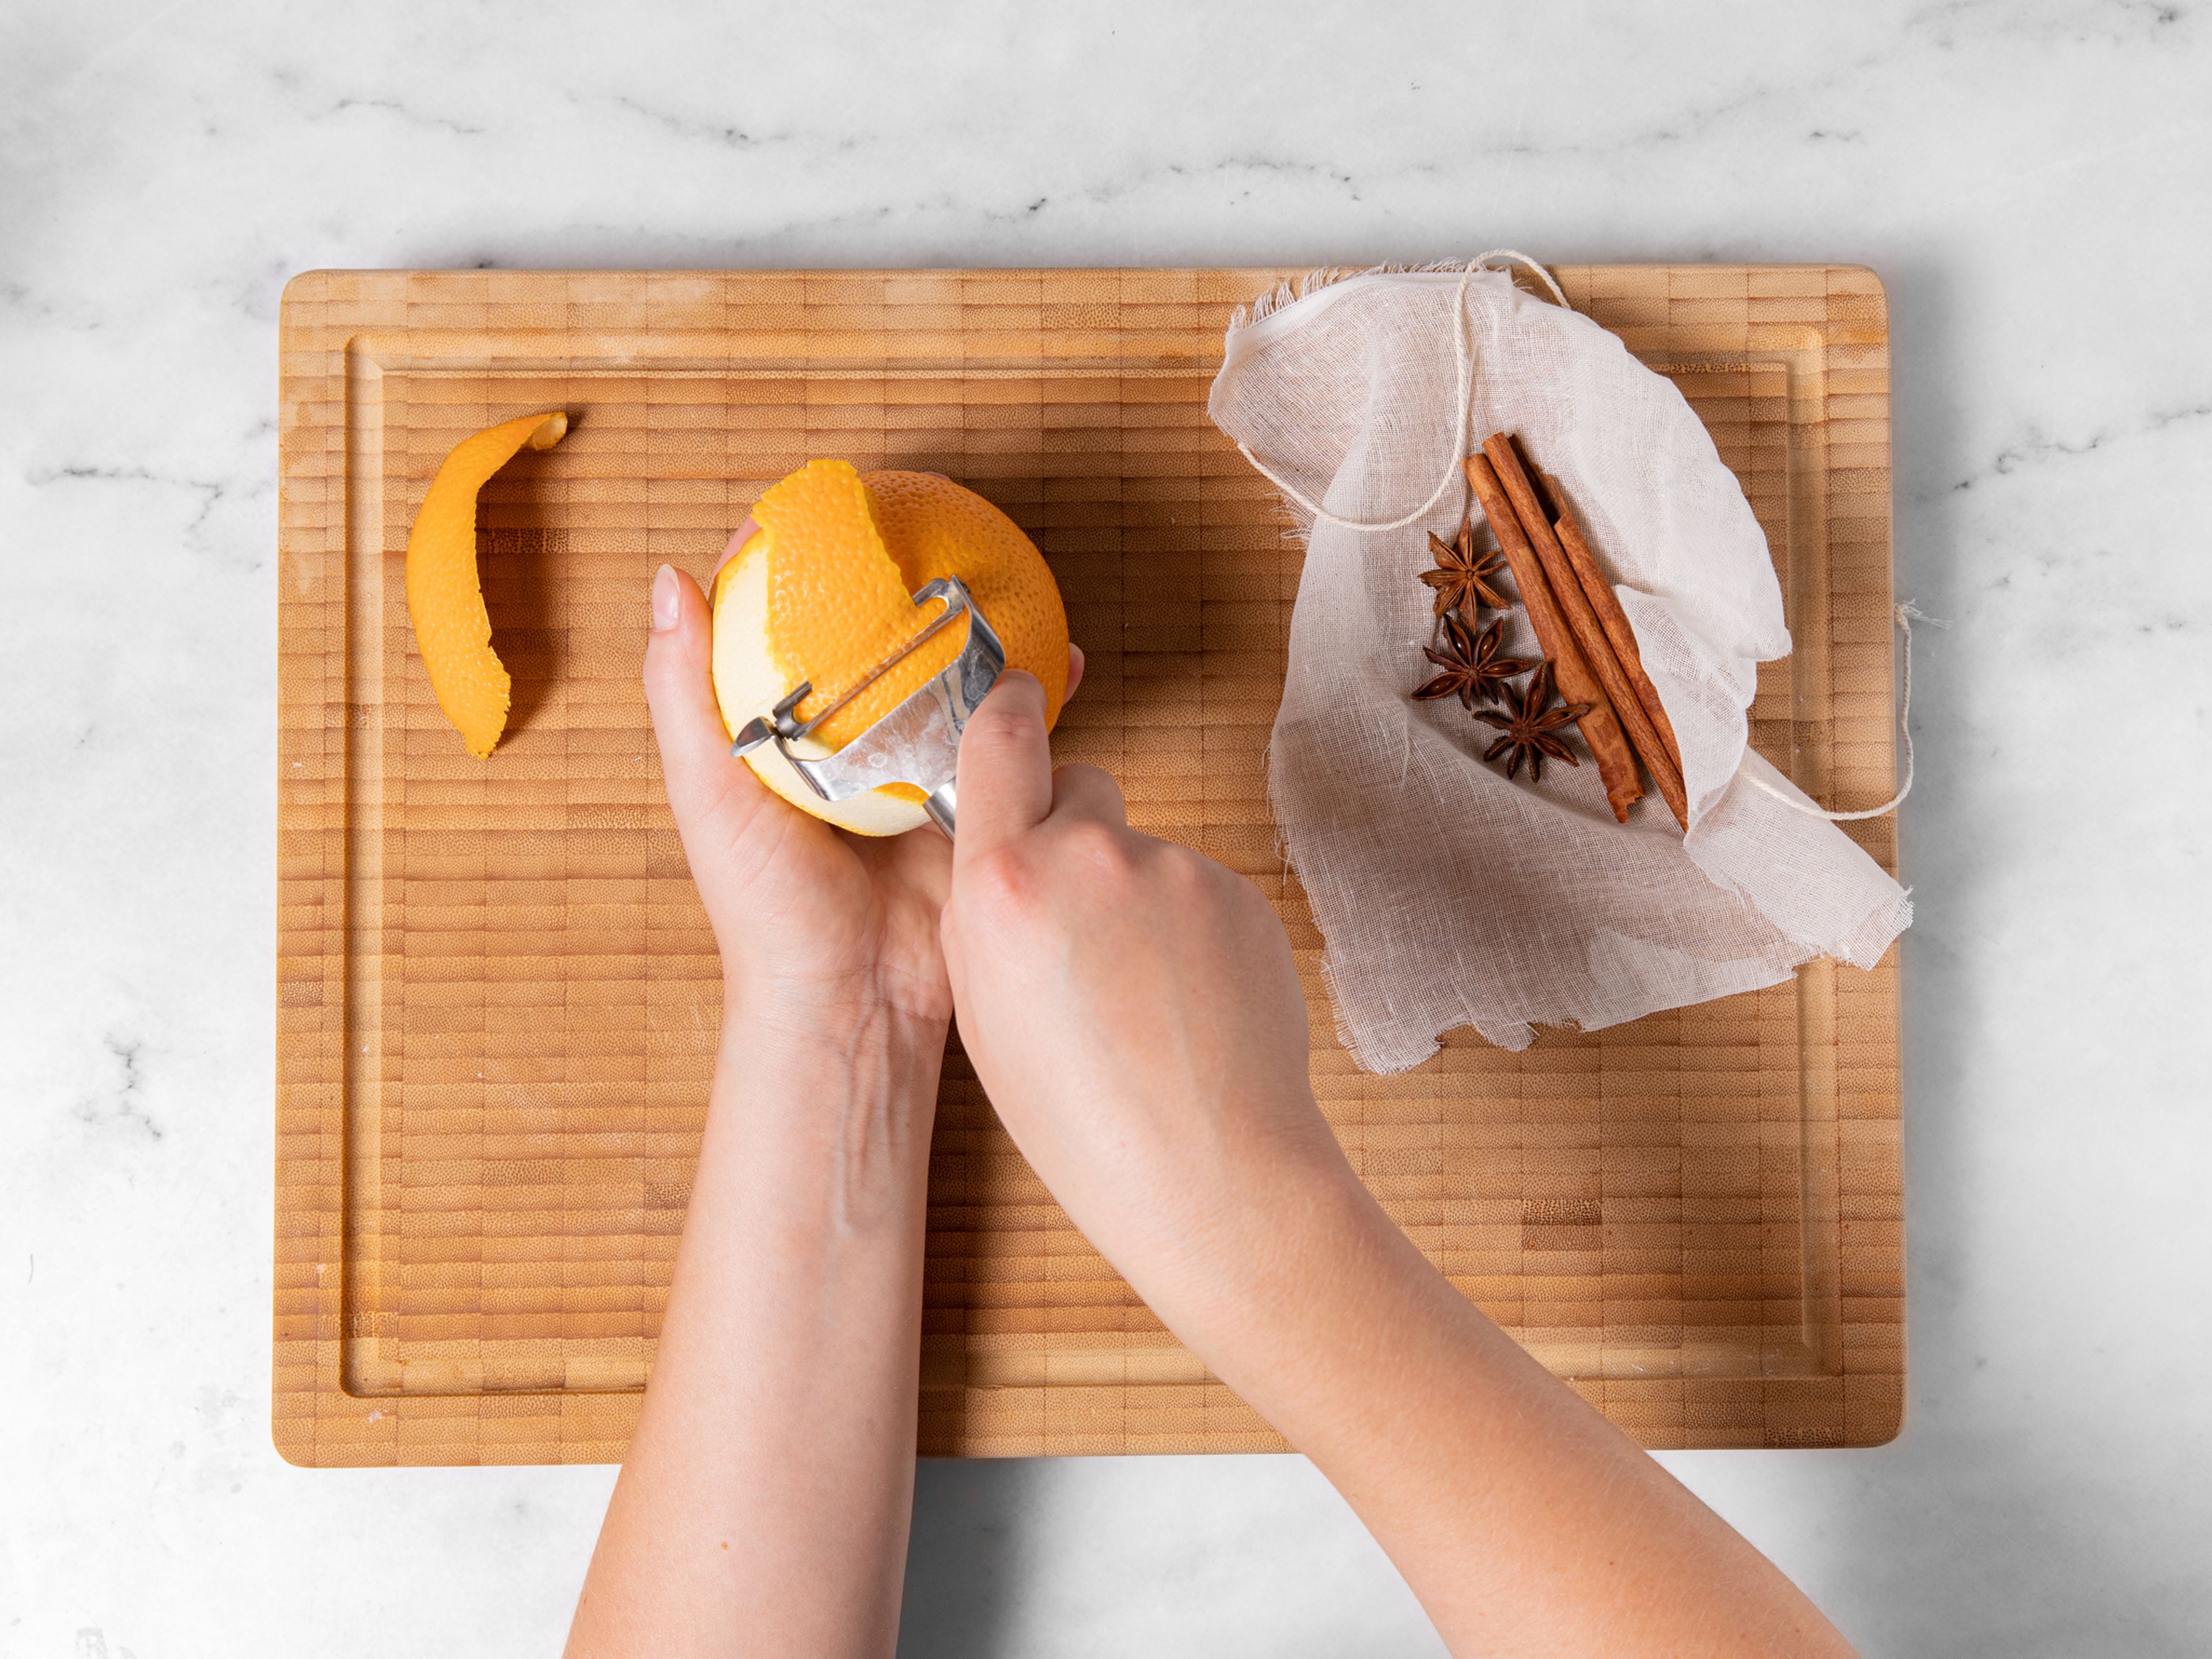 Use a vegetable peeler to peel 2 large pieces of zest from the orange. Use a paring knife to remove any white pith. Add orange zest, star anise, and cinnamon to a piece of cheesecloth and secure with kitchen twine.